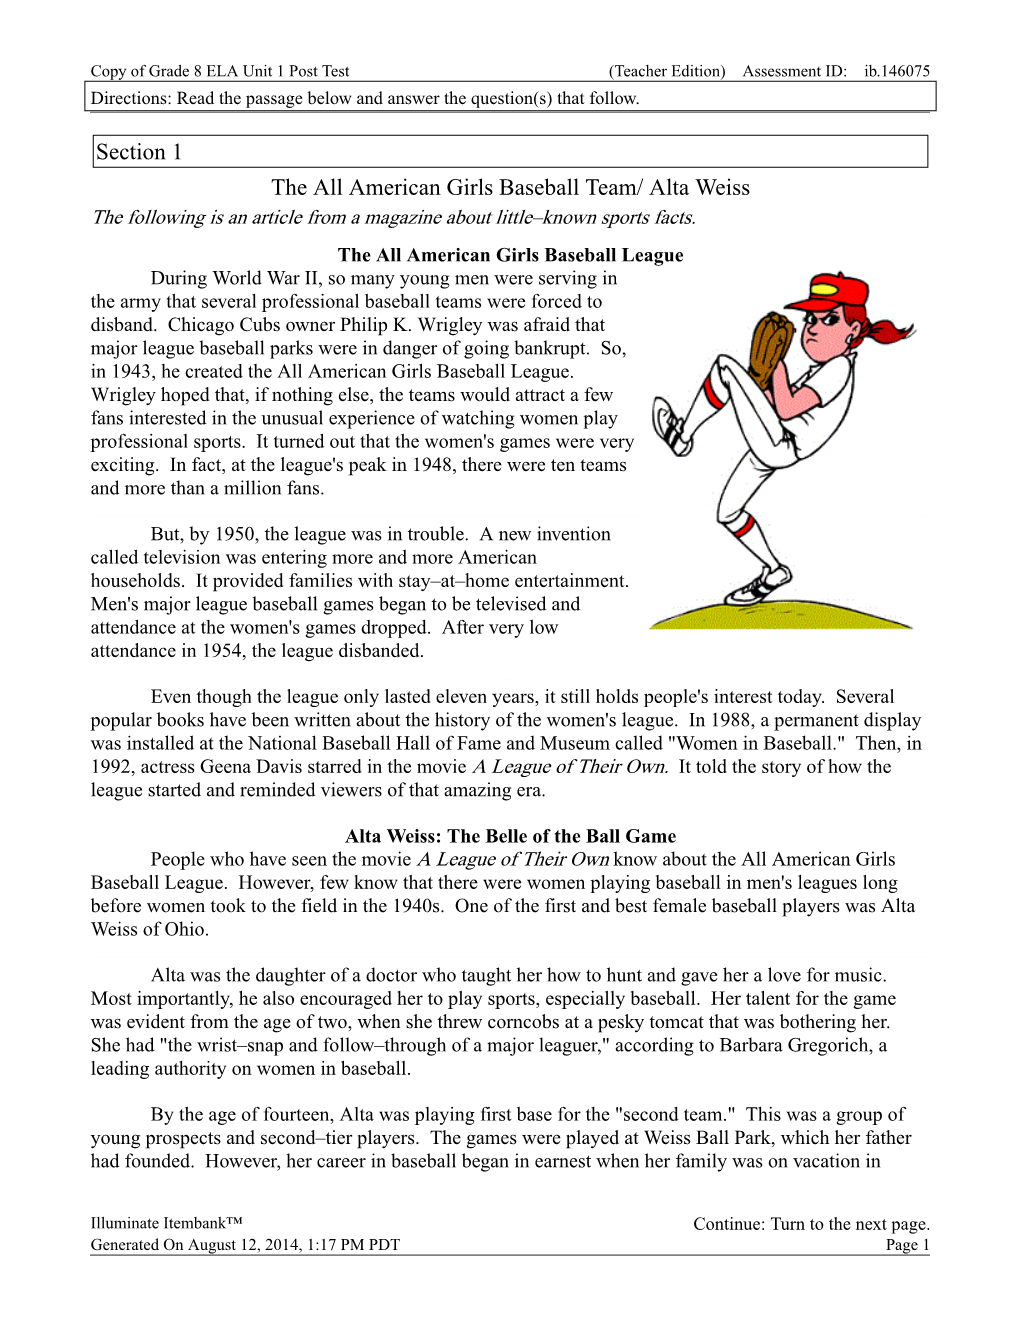 Section 1 the All American Girls Baseball Team/ Alta Weiss the Following Is an Article from a Magazine About Little–Known Sports Facts